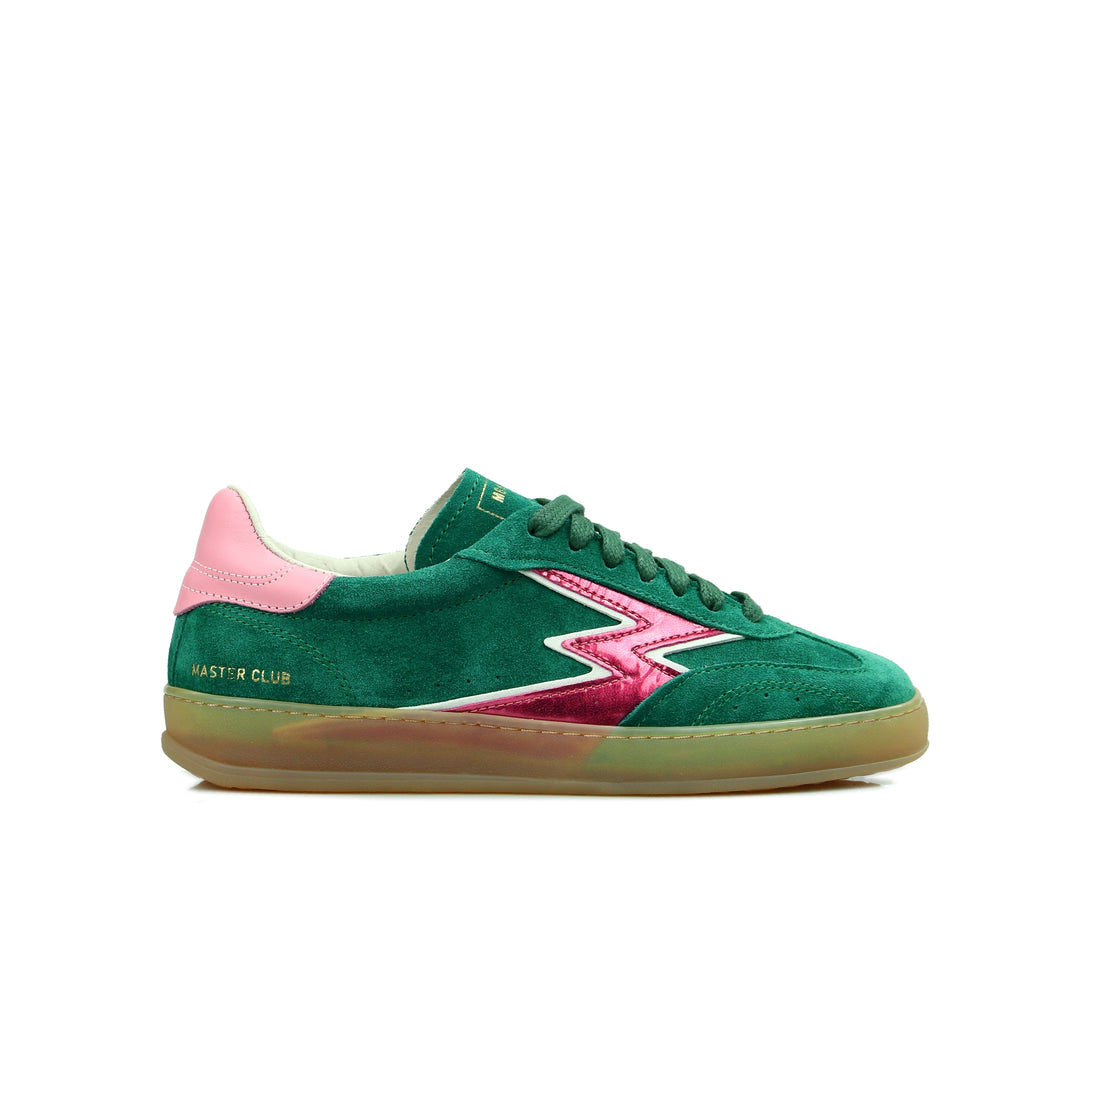 Green Club sneakers with pink details